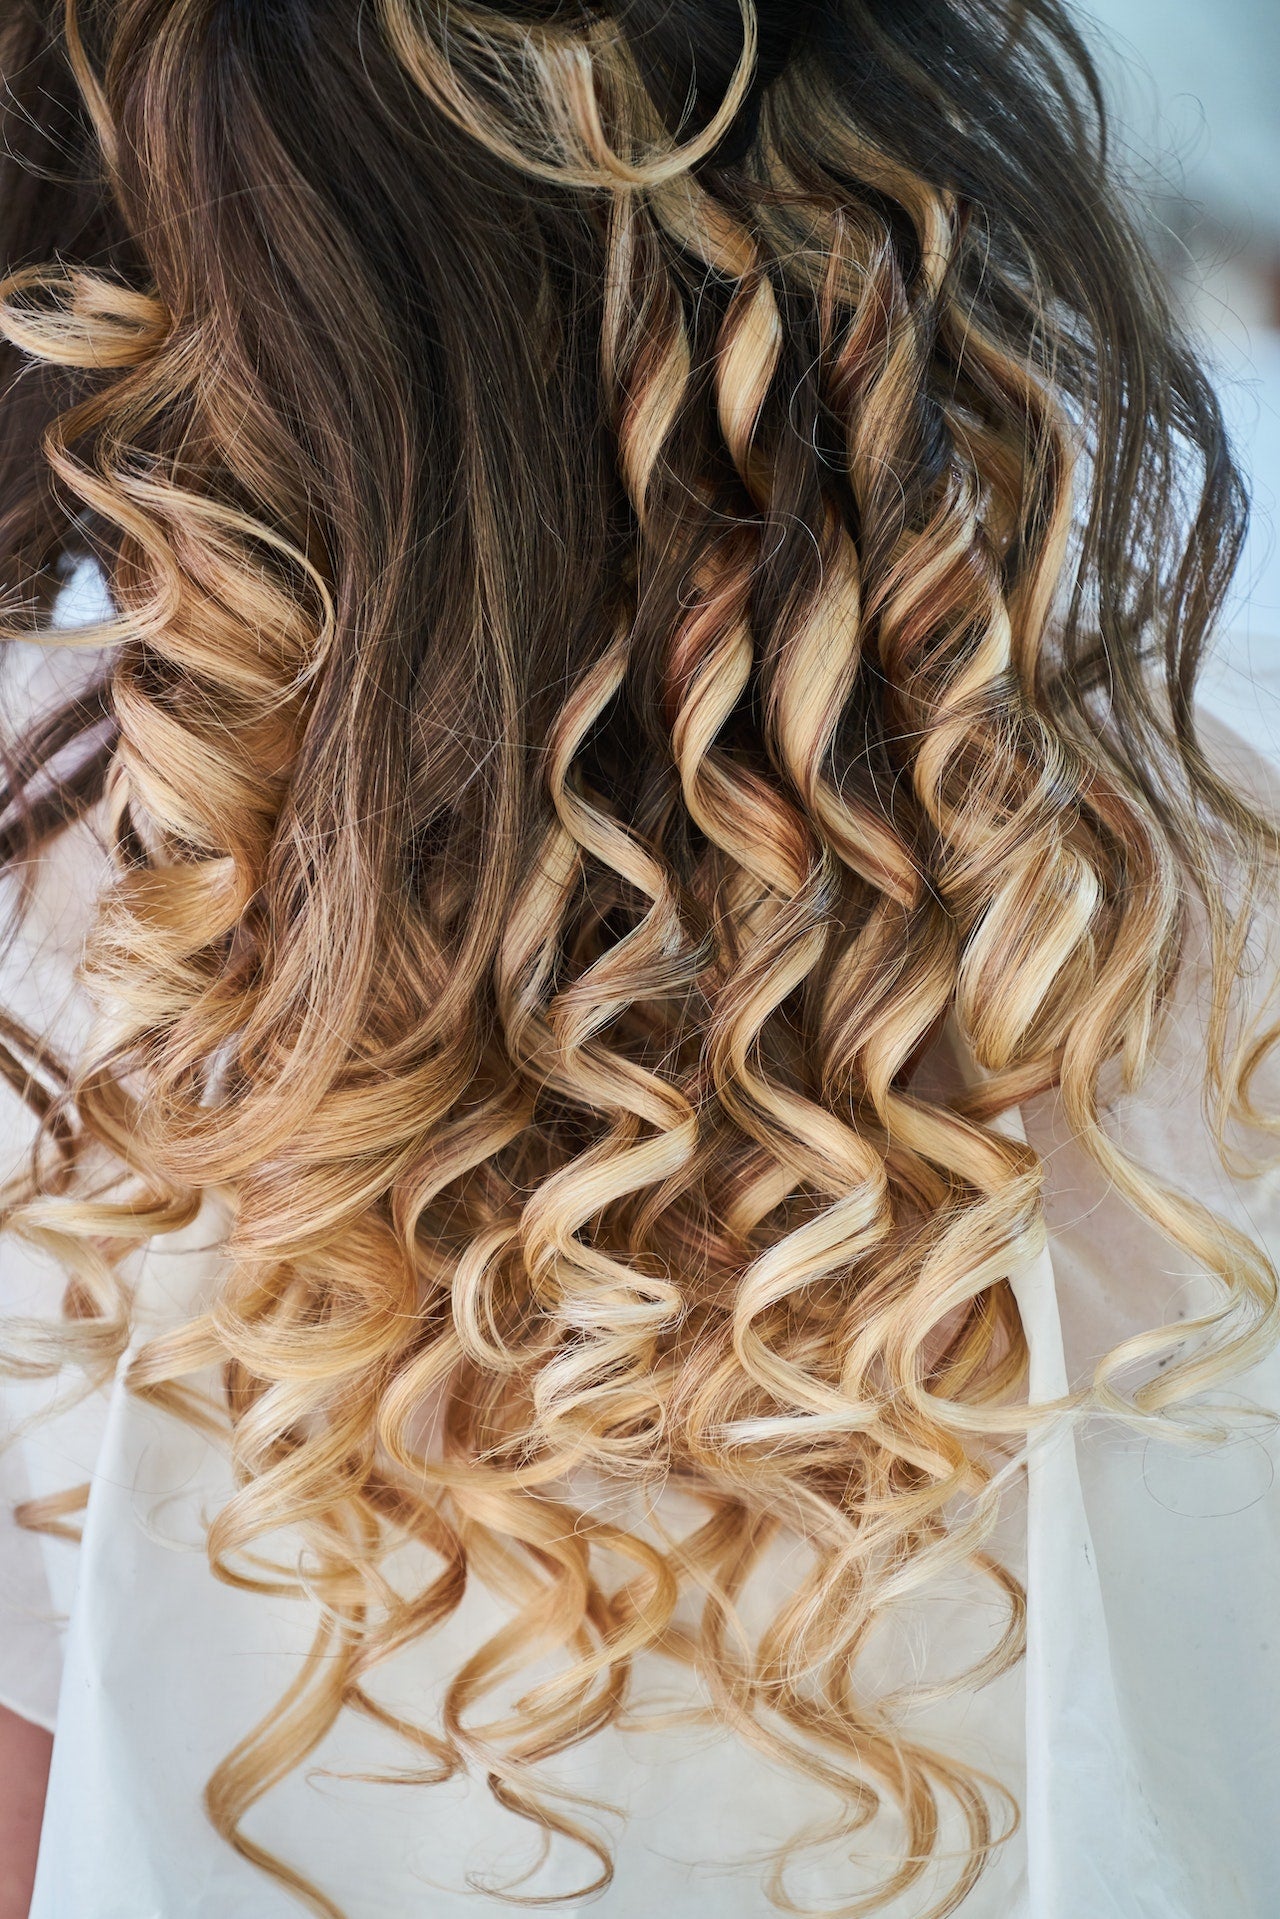 Perfect curly hair